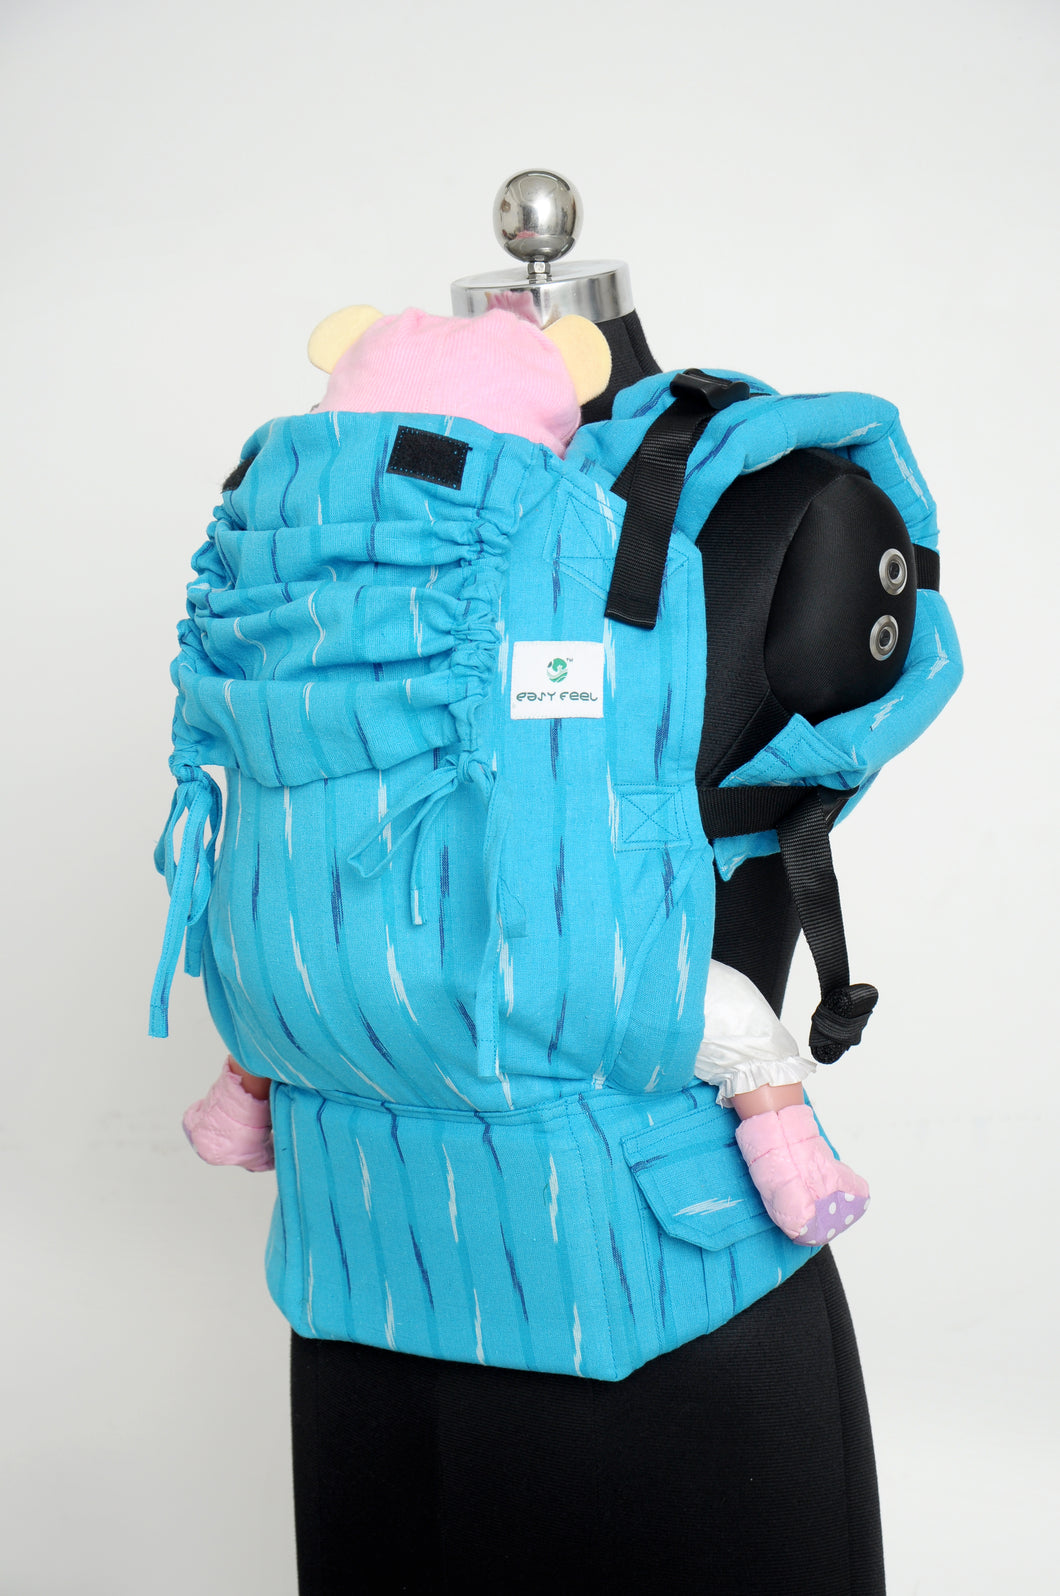 Standard Wrap Converted Soft Structured Carrier - Azureous